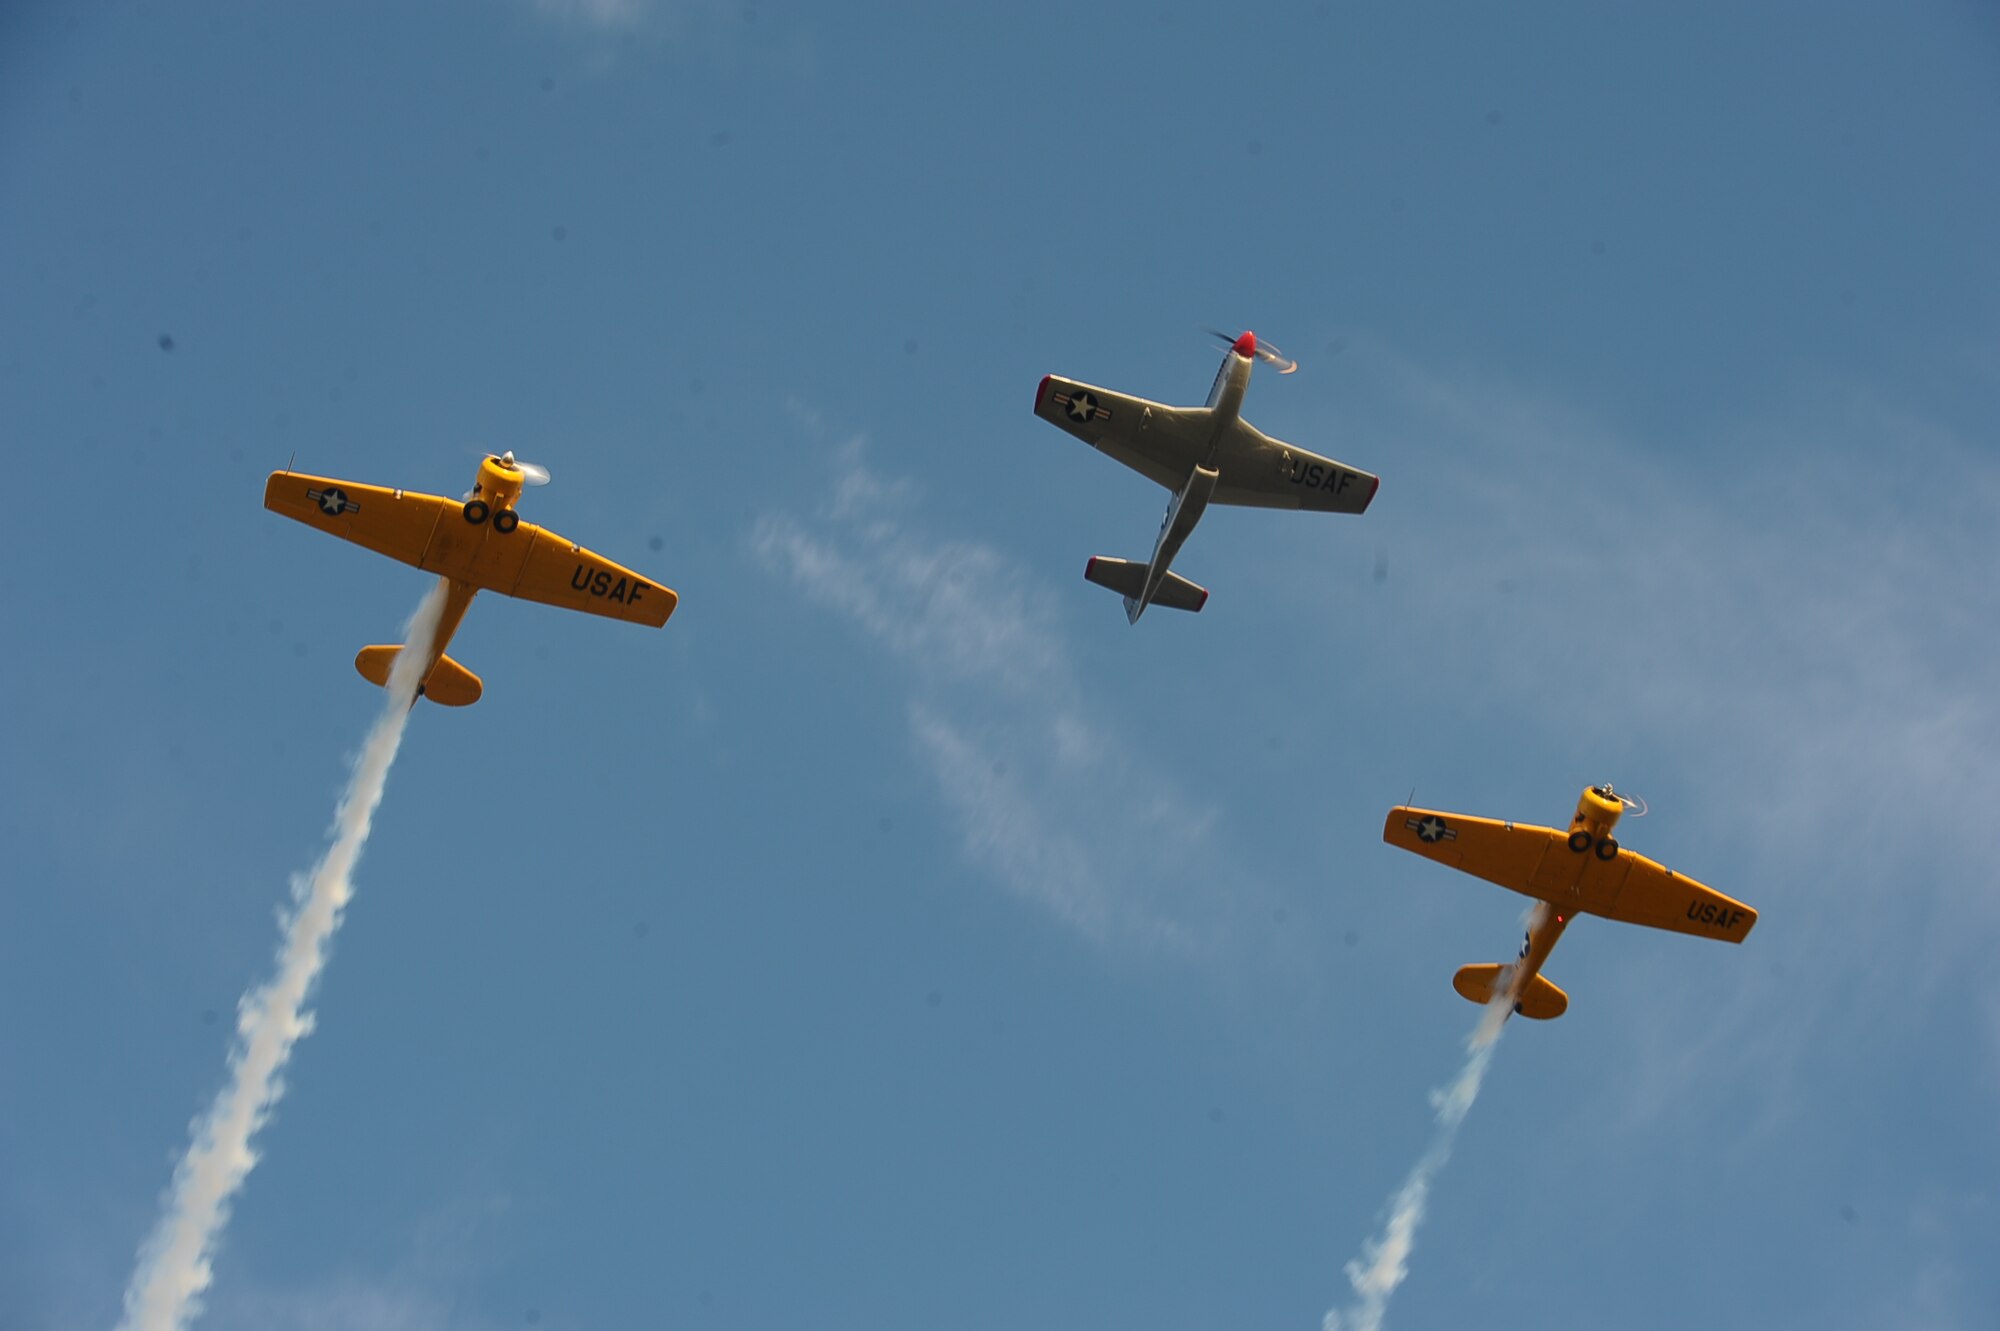 A formation of three AT-6 aircraft fly over Stennis Lock and Dam in Columbus, Mississippi. Fireworks on the Water, a free and open to the public event occurring July 1, 2017, is sponsored by Visit Columbus, U.S. Army Corps of Engineers, Lowndes County, the City of Columbus and Columbus Air Force Base to honor our nation’s independence. (U.S. Air Force photo by Senior Airman John Day)